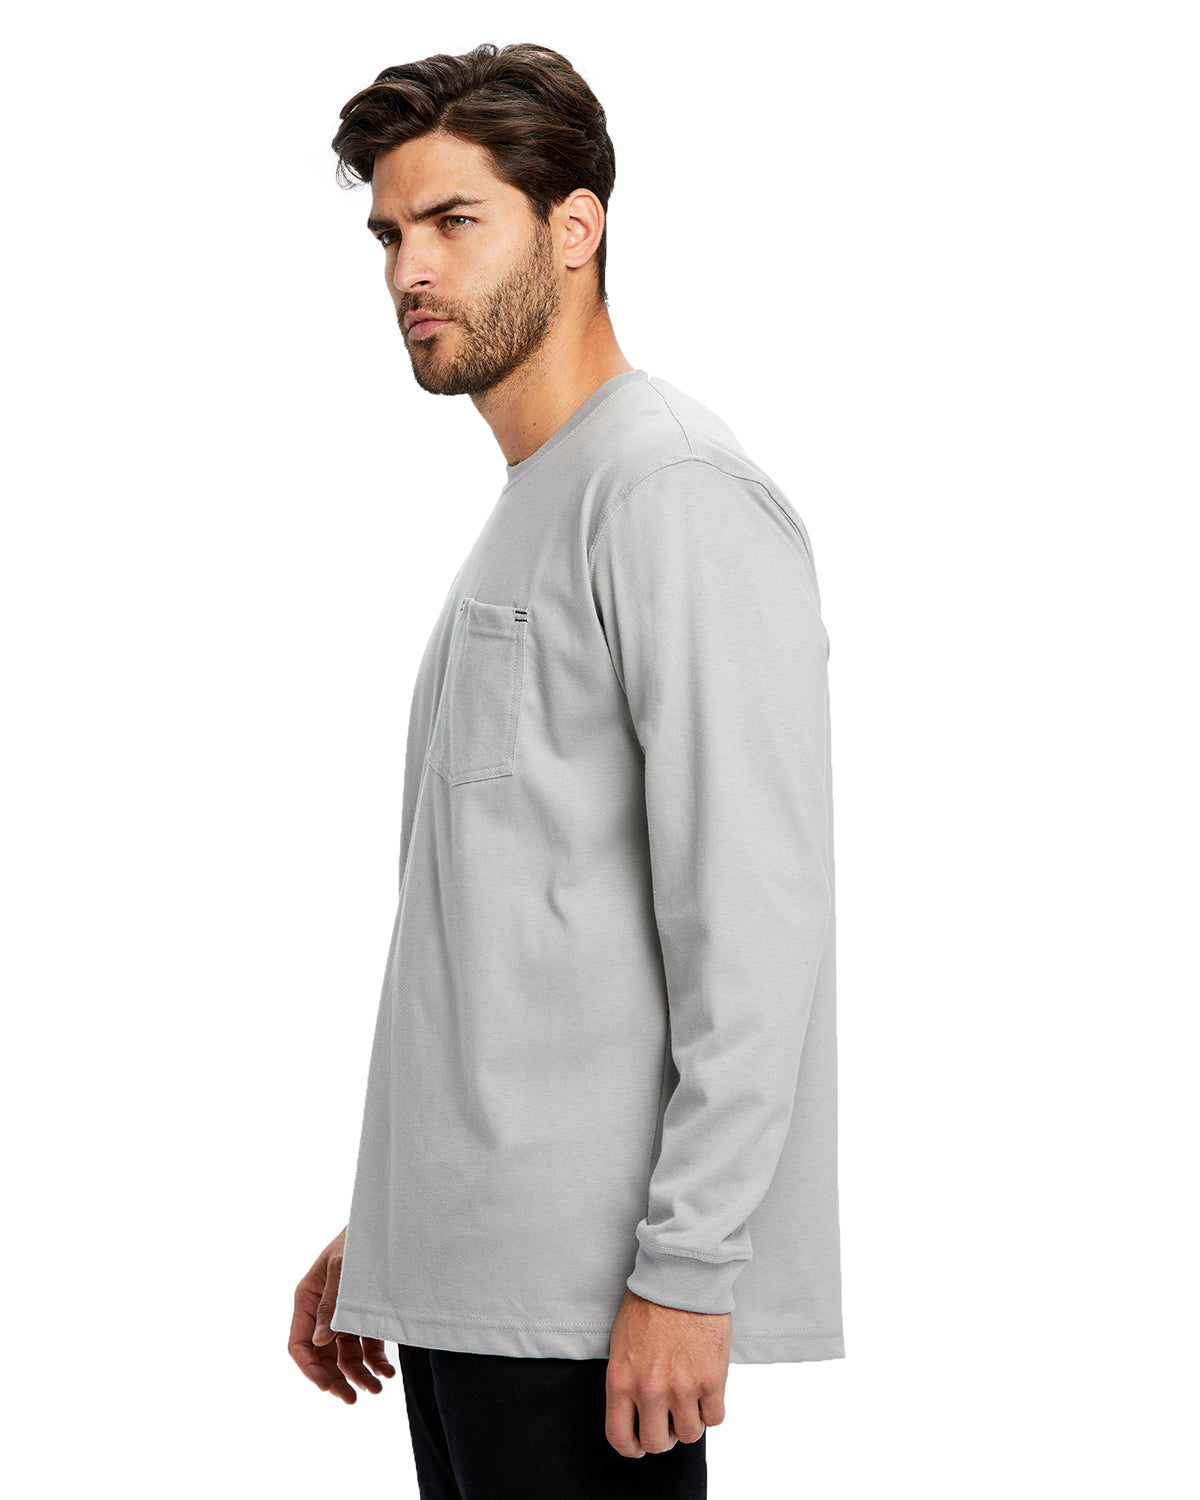  Flame Resistant Long Sleeve Shirt with Chest Pocket - Made in  USA (Beige, Small) : Tools & Home Improvement